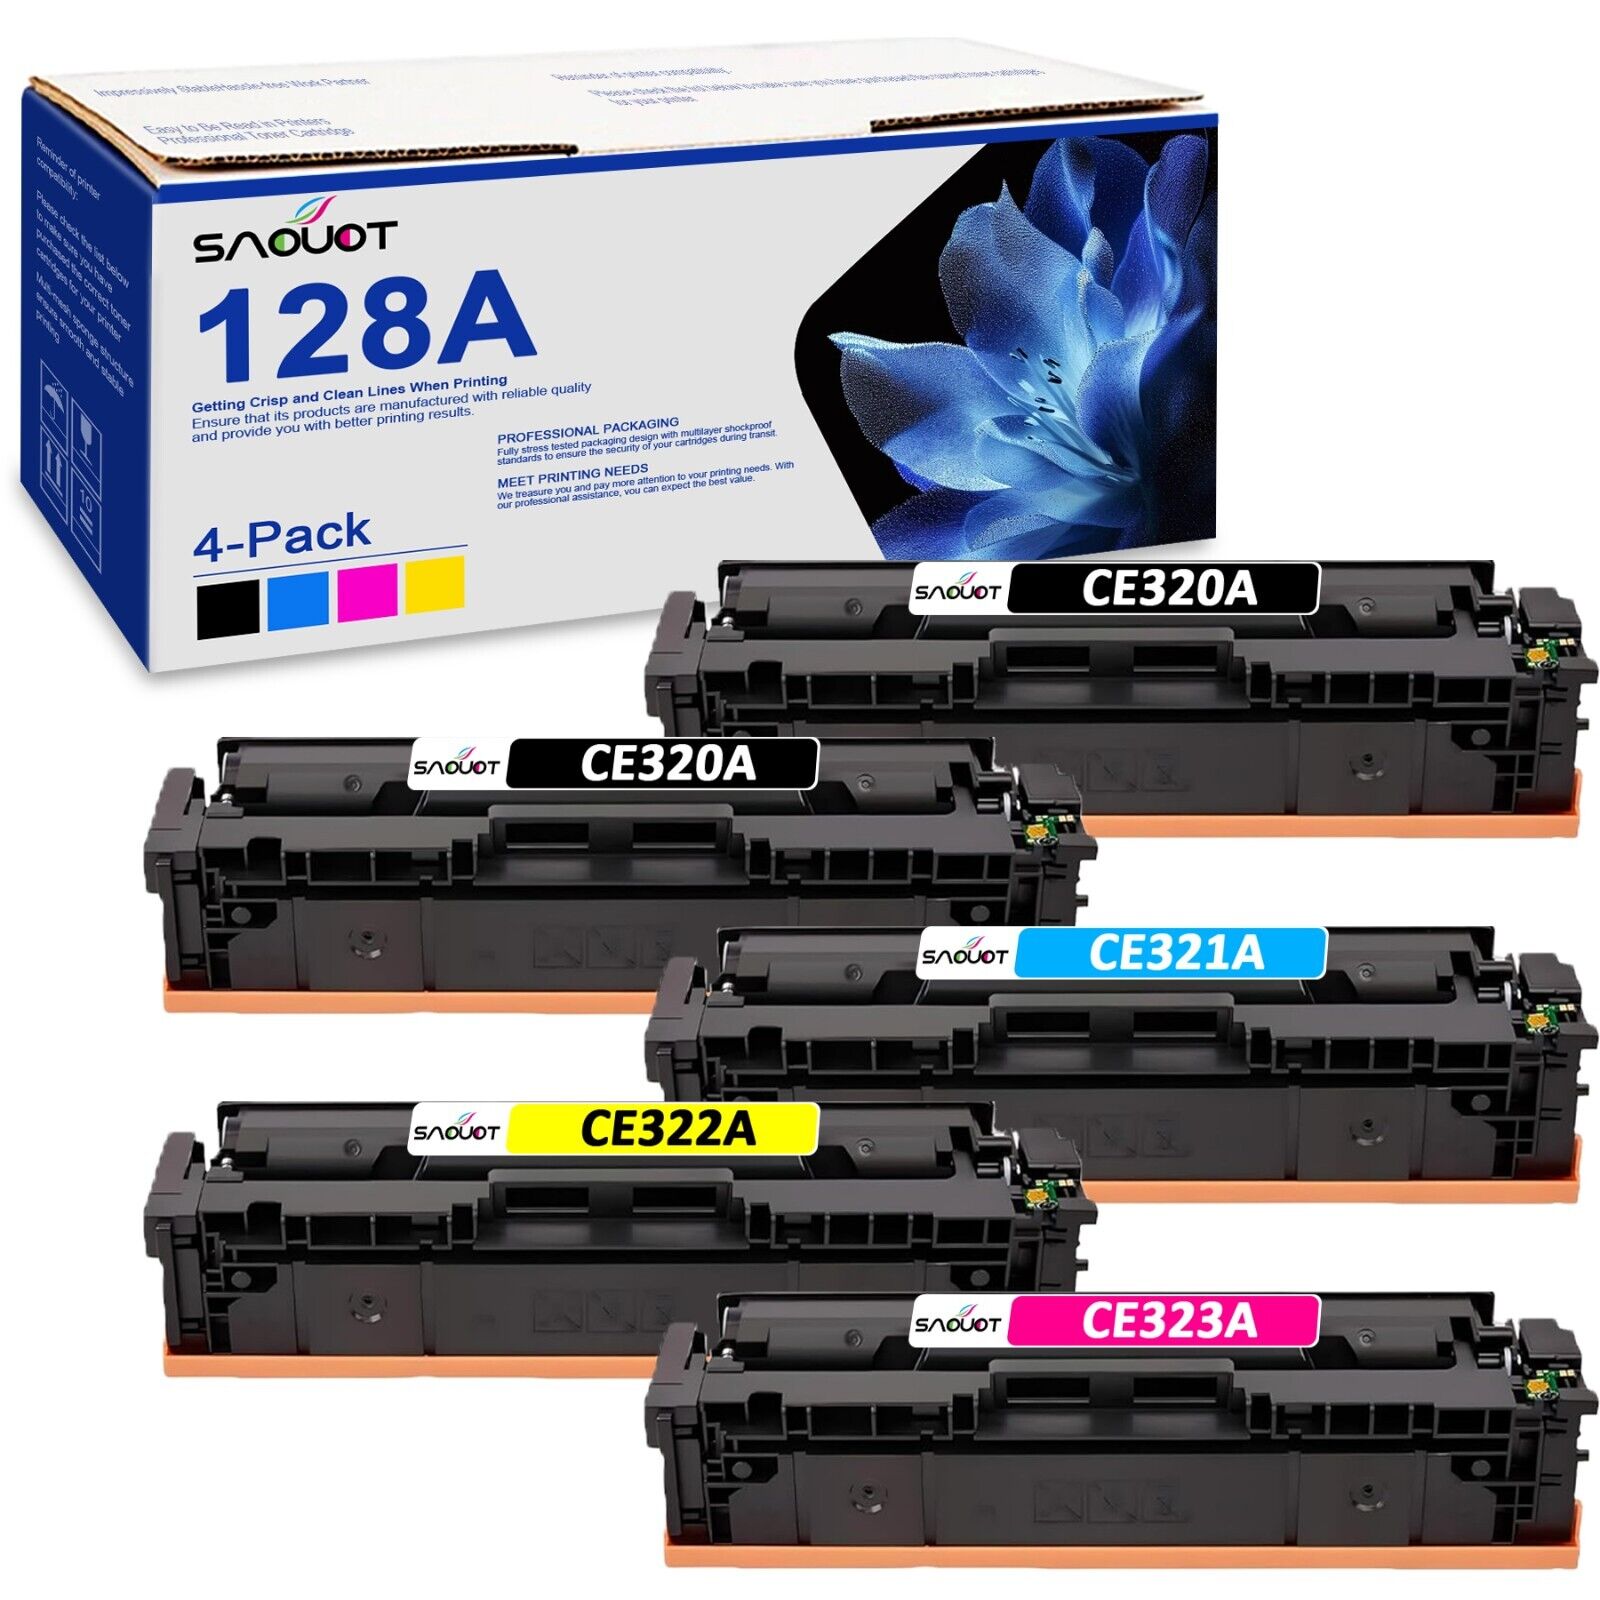 128A CE320A Toner Cartridge Replacement for HP Pro CM1415fn CM1415fnw CP1525n